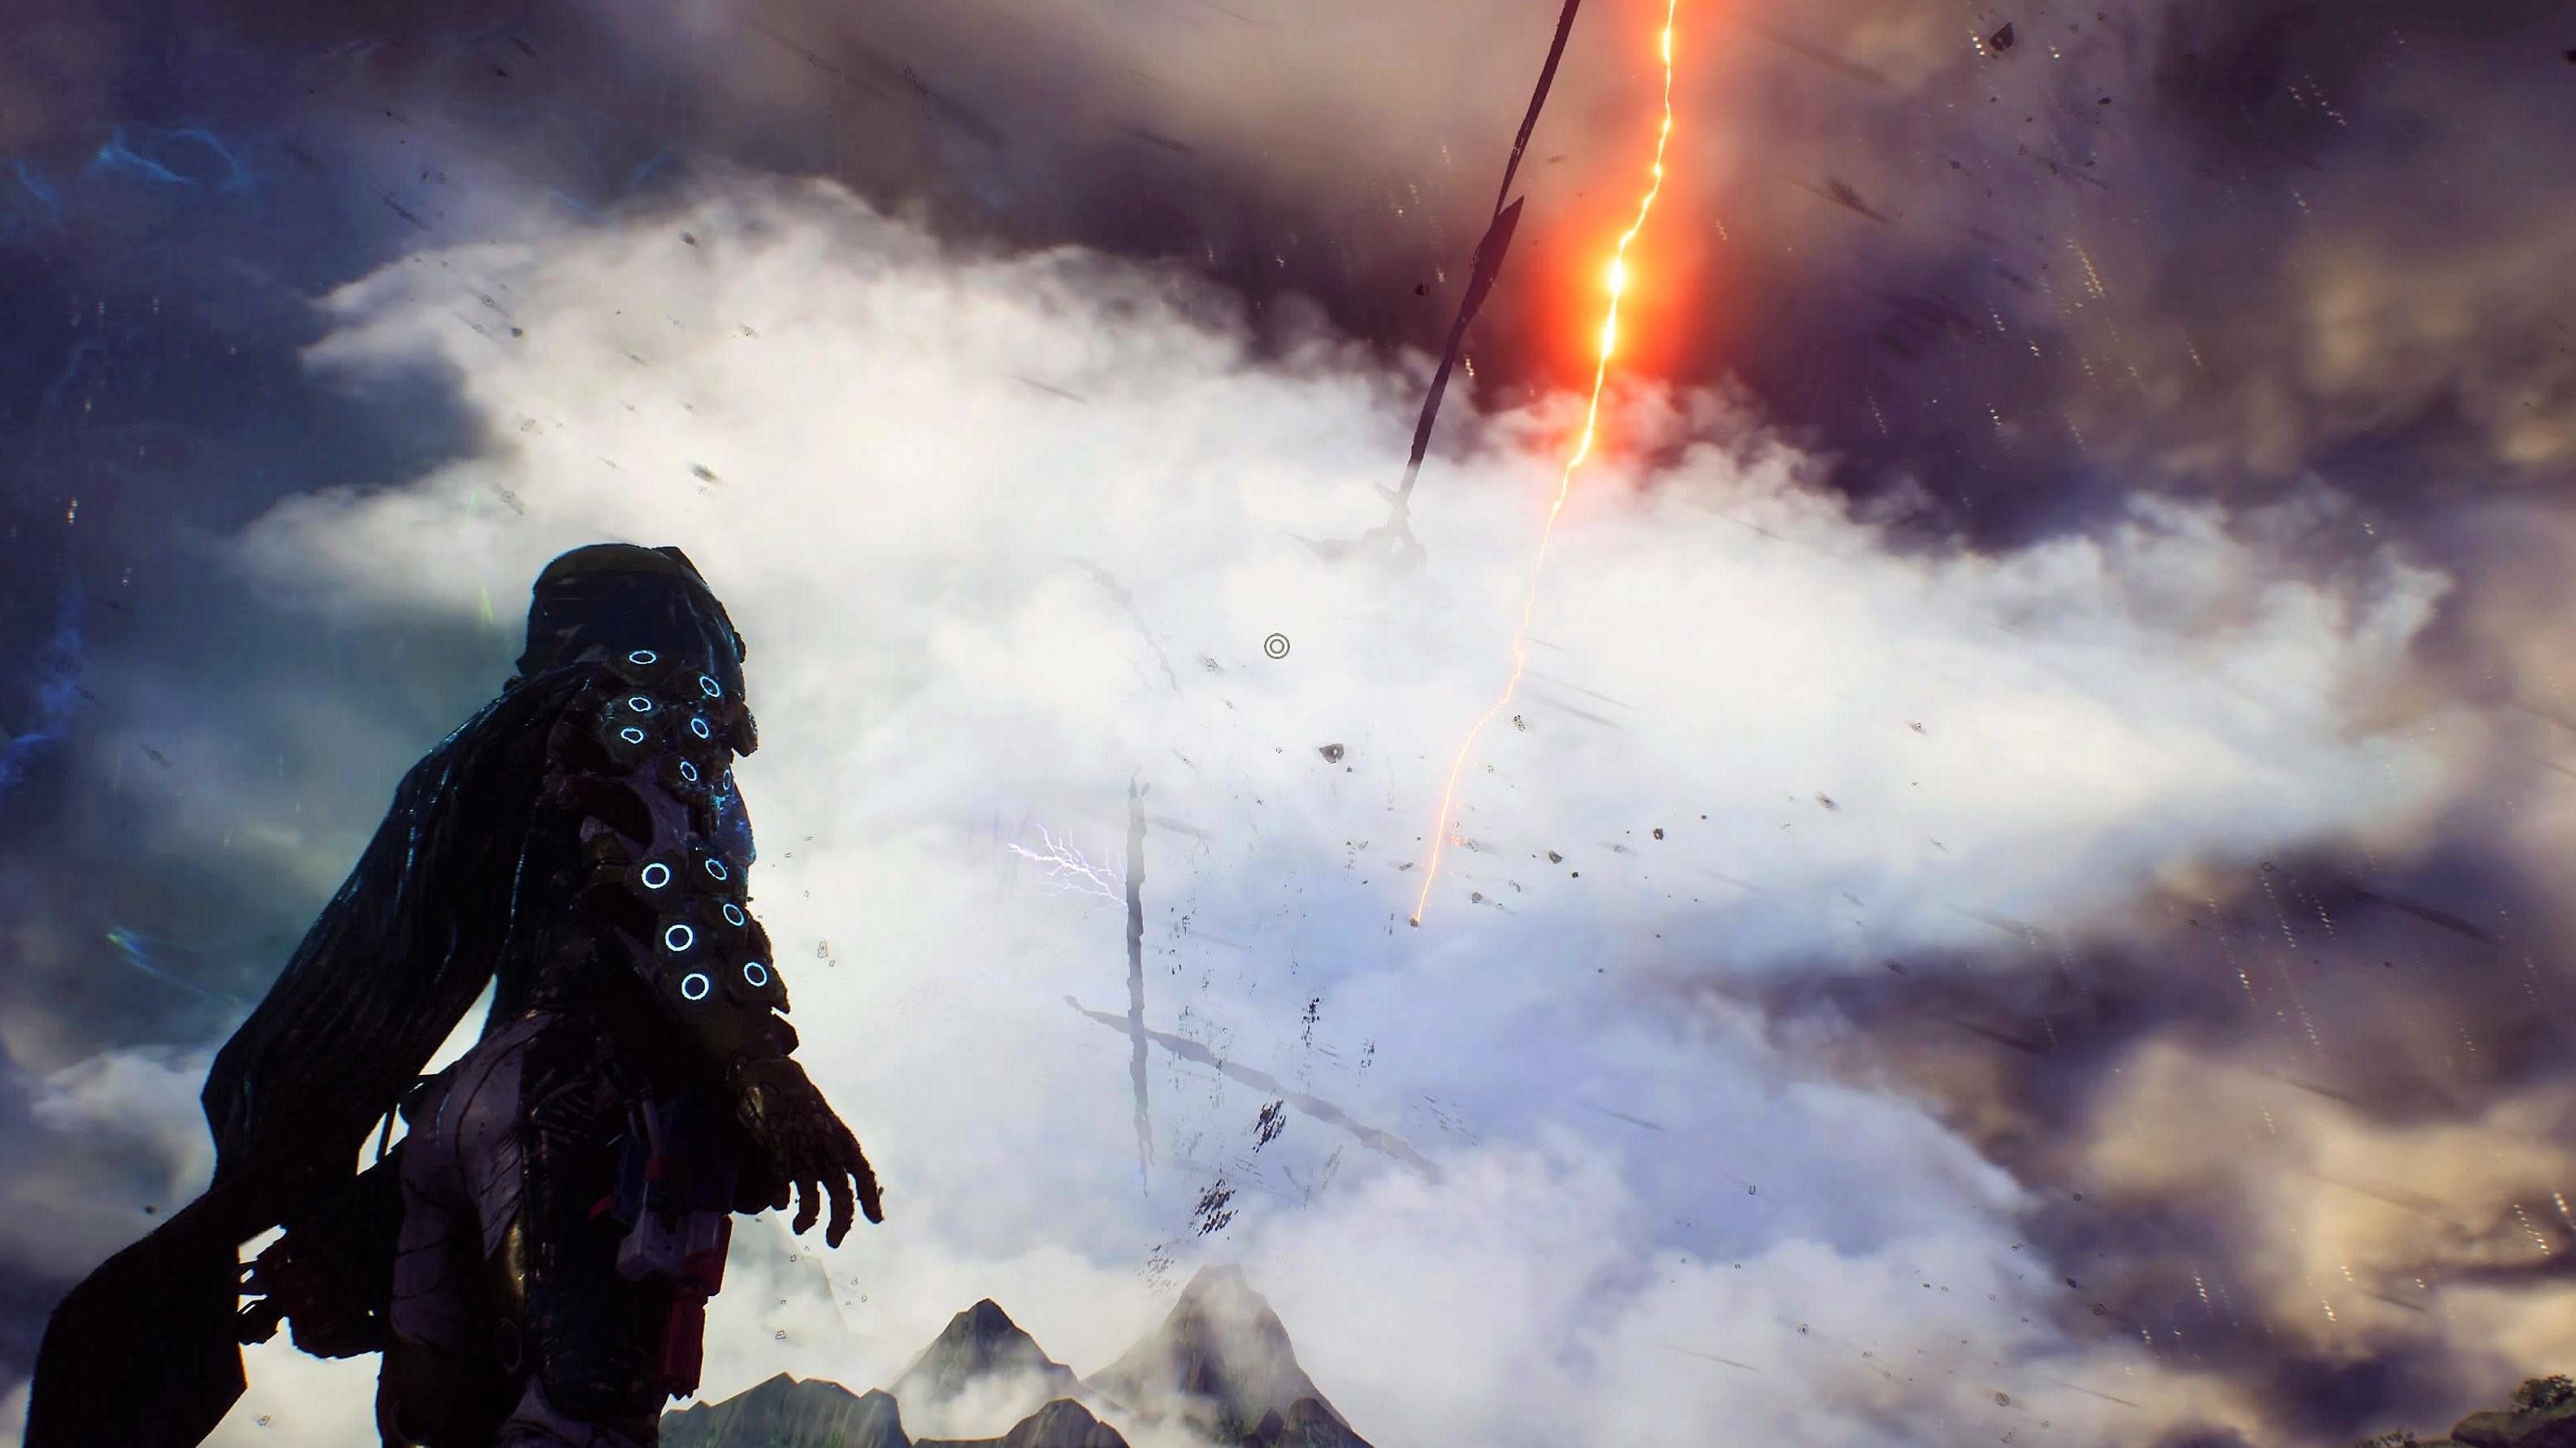 A Mysterious Storm Is Brewing On Anthem’s Horizon After Weeks Of Nothing